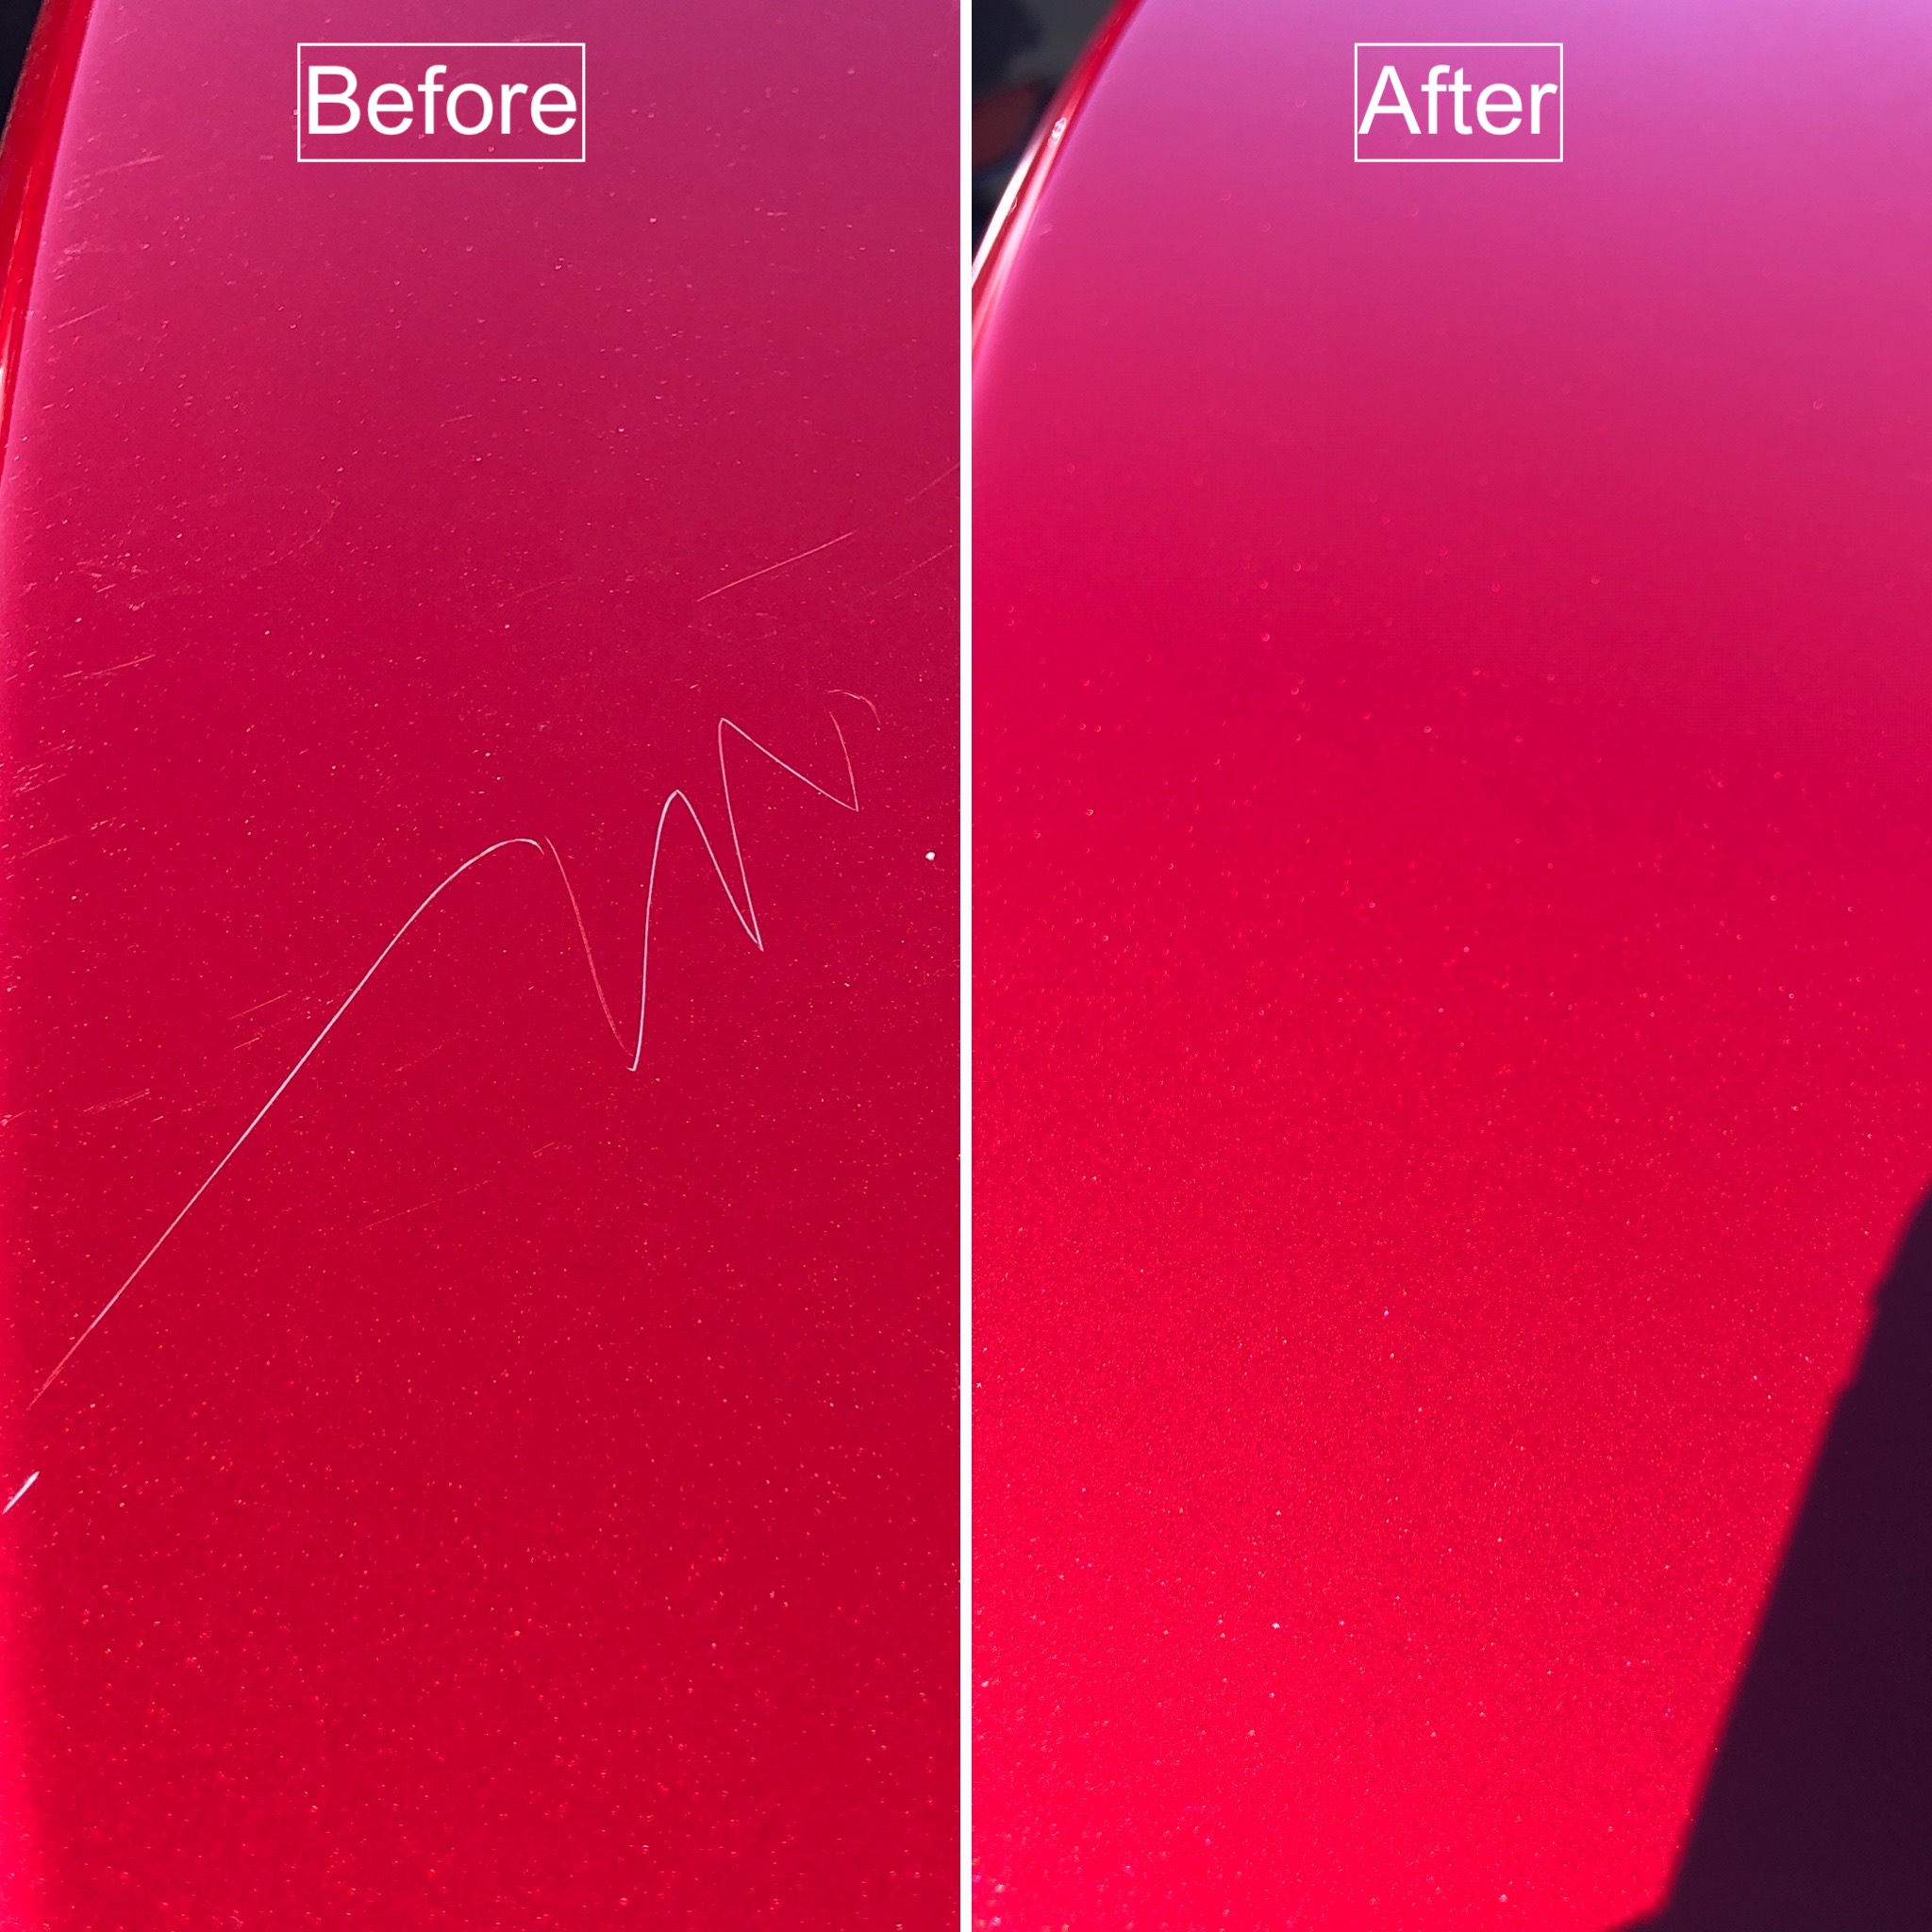 Different Types Of Scratches On Cars And How To Fix Them